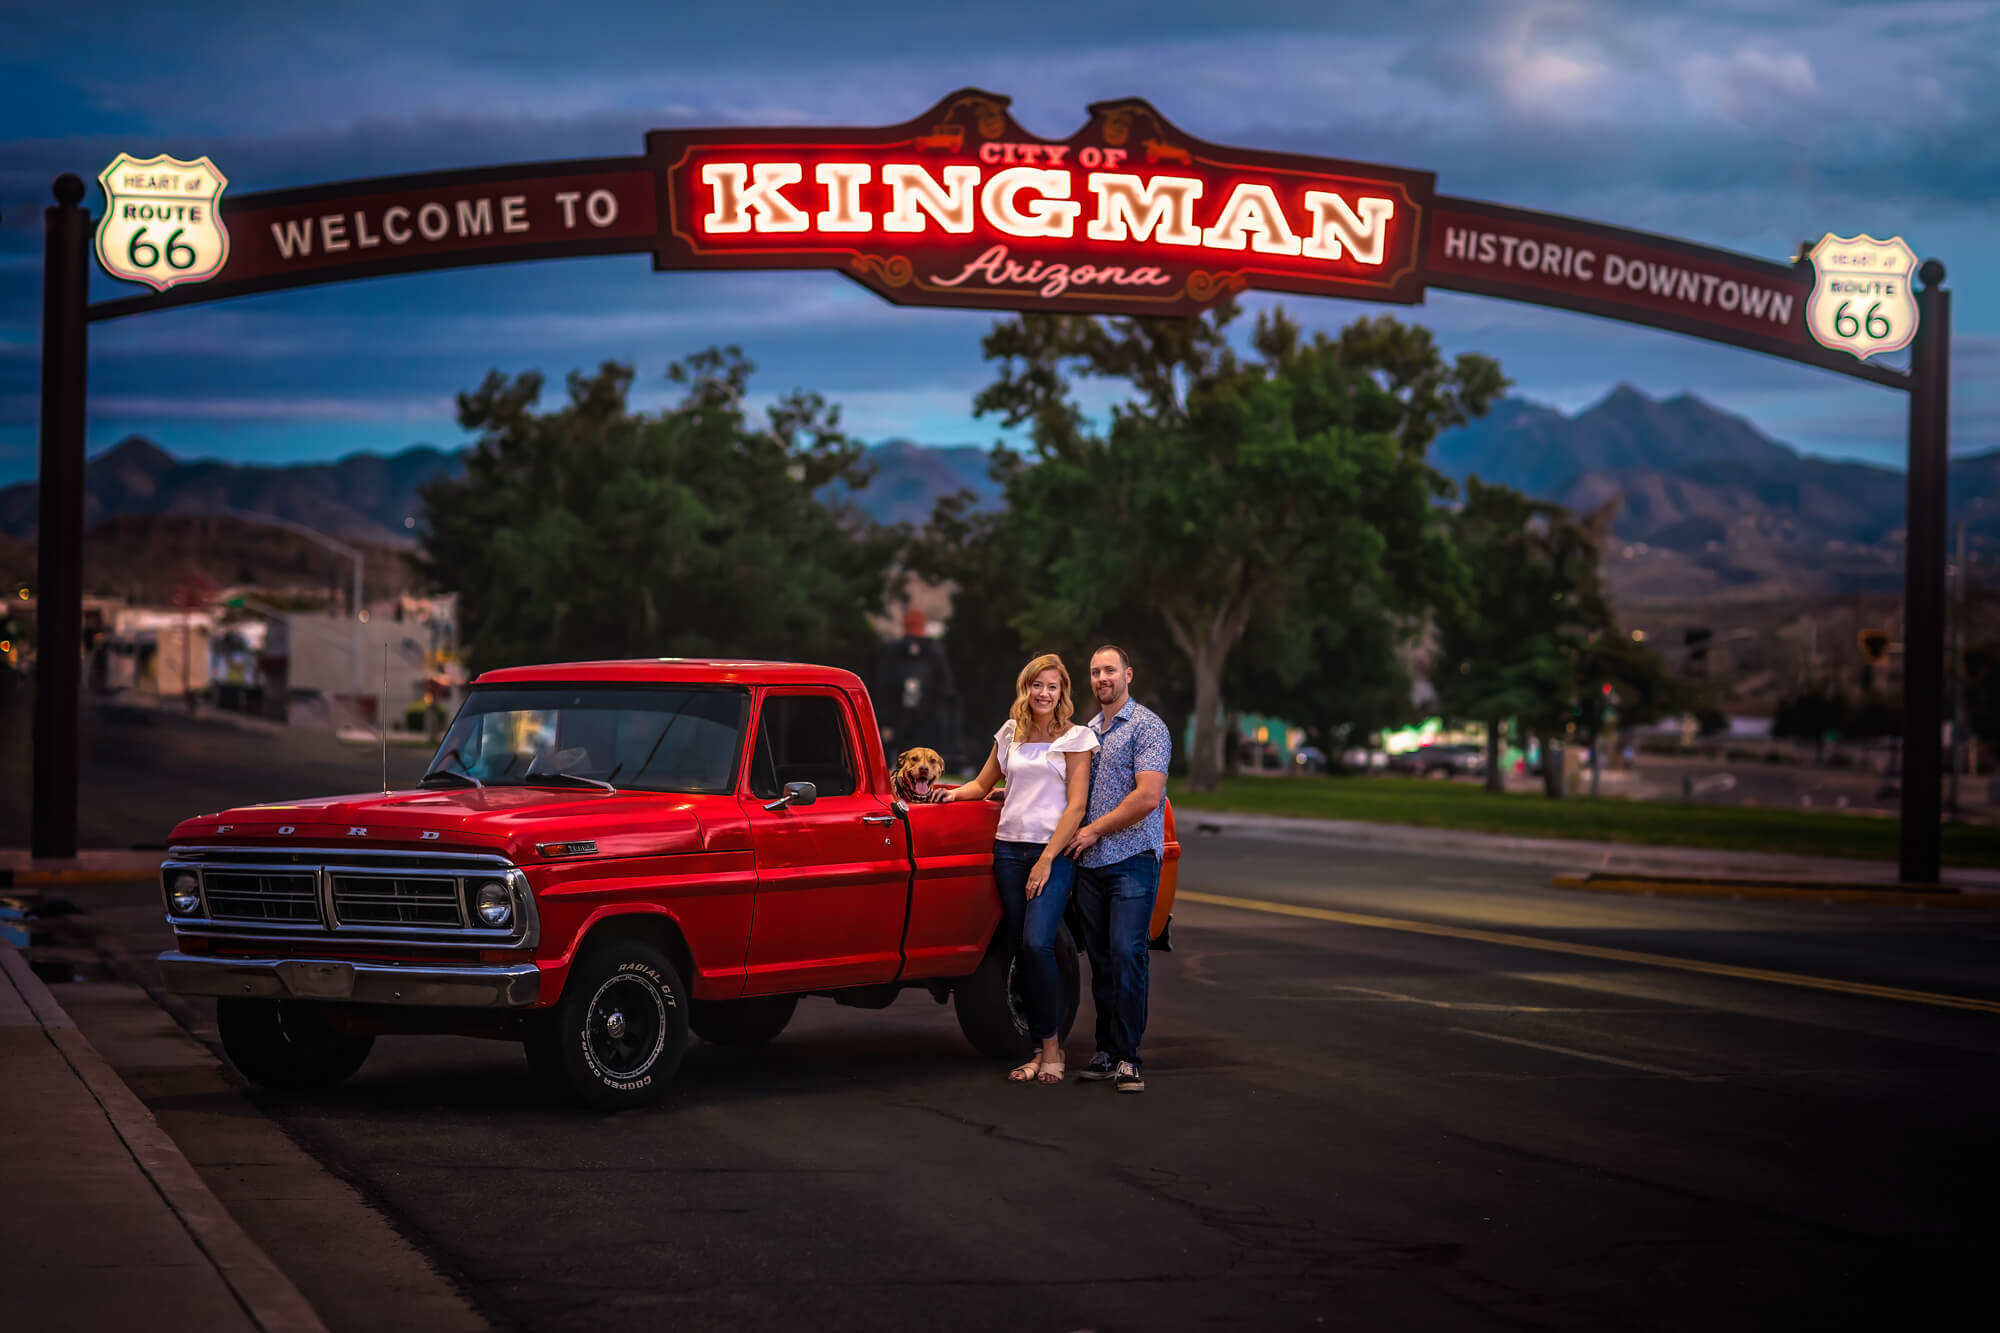 Neon lights in Kingman, AZ. Instagrammable location engagement session for photographers.